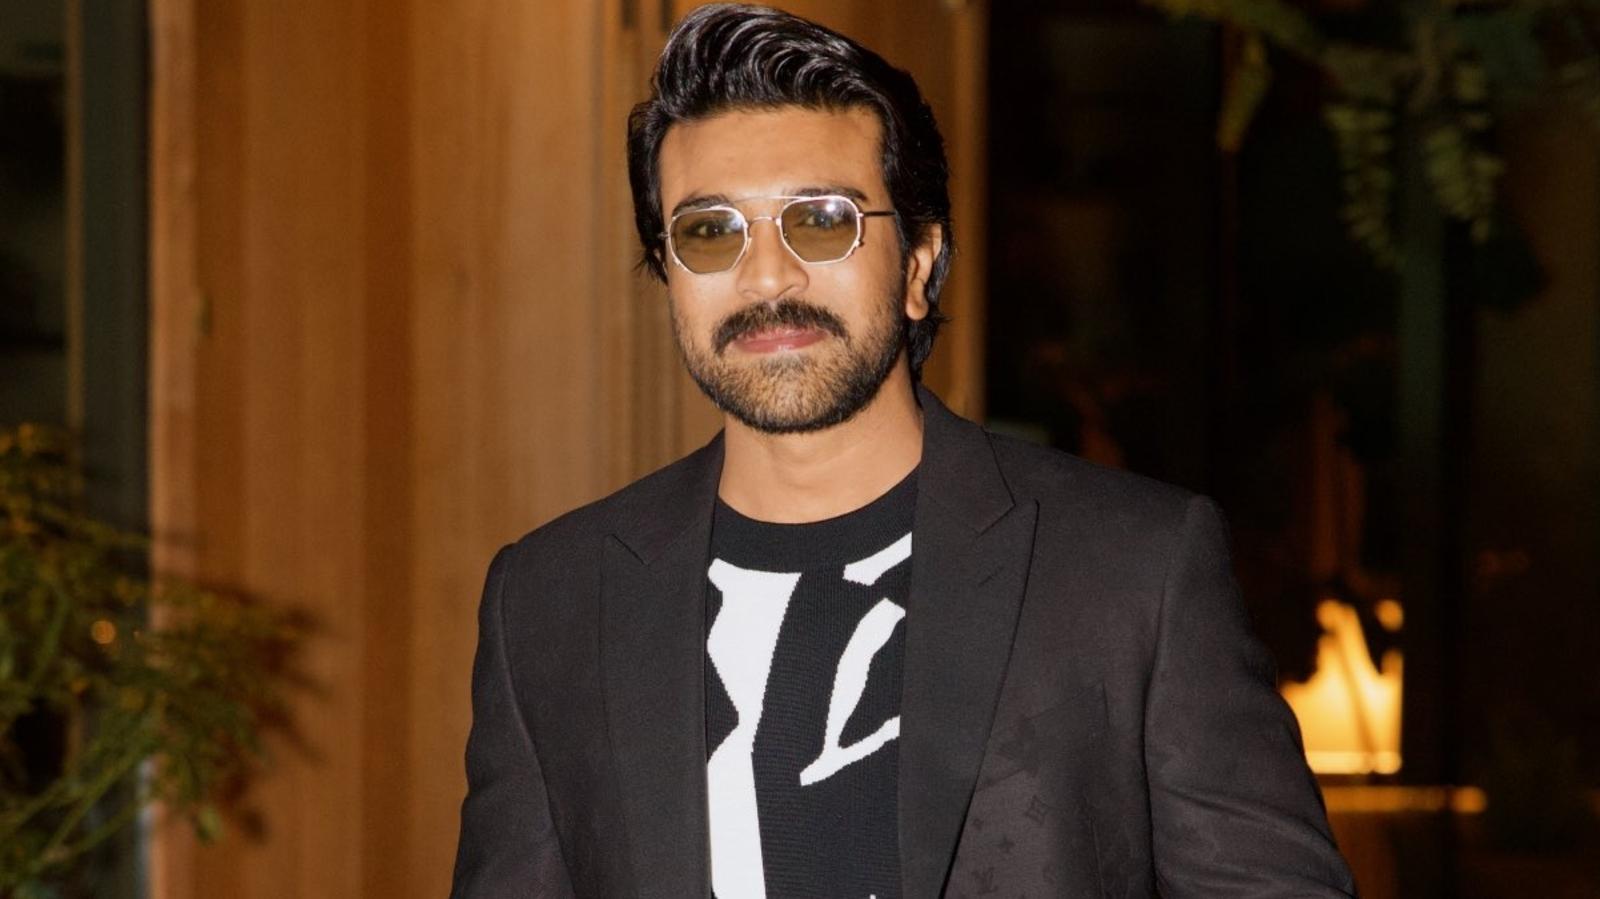 Ram Charan Attends Star Studded Los Angeles Party Ahead Of Golden